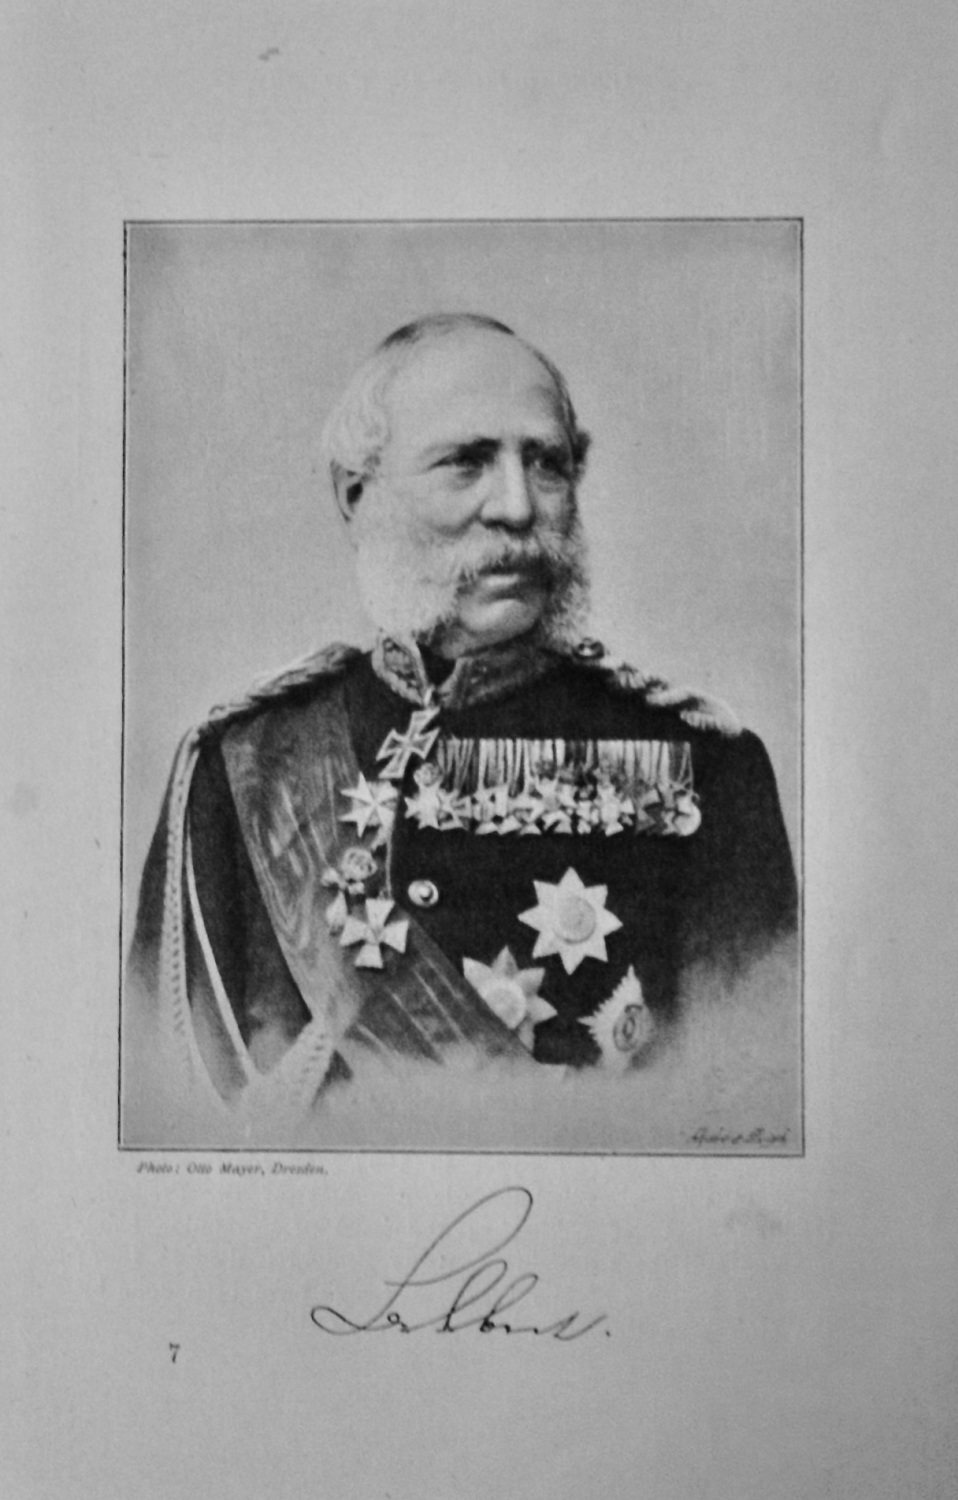 HIs Majesty King Albert :  The King of Saxony. 1895.